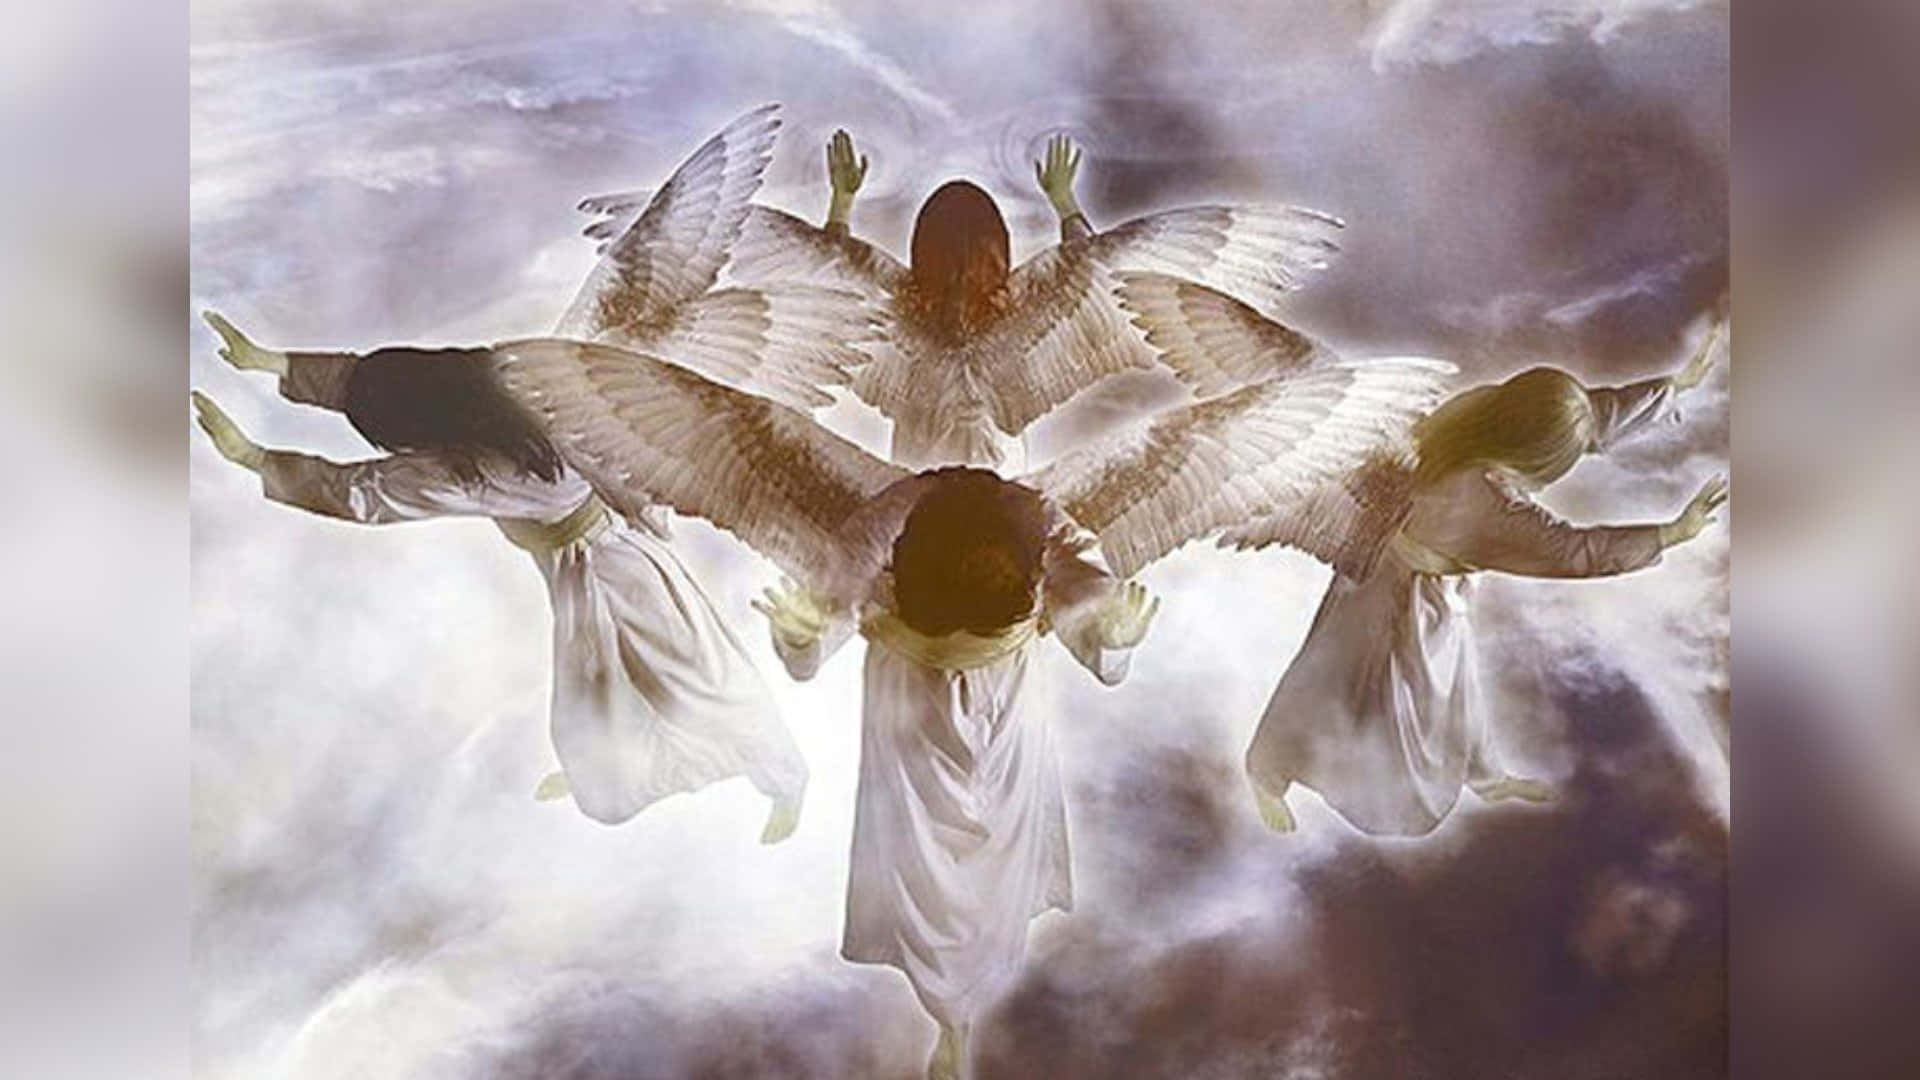 Powerful imagery of Angels of God in the clouds